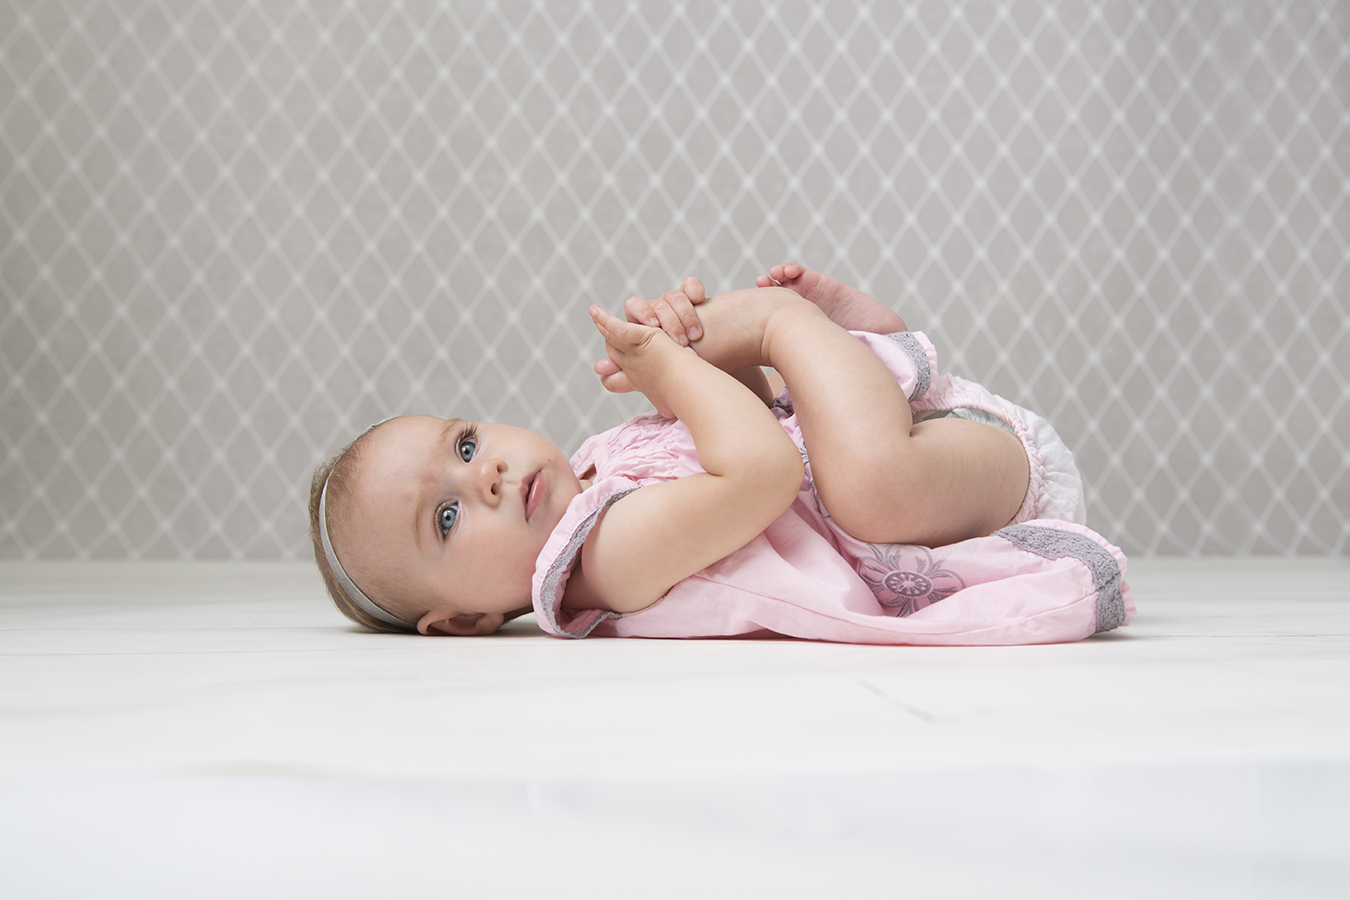 Six month old baby photograph